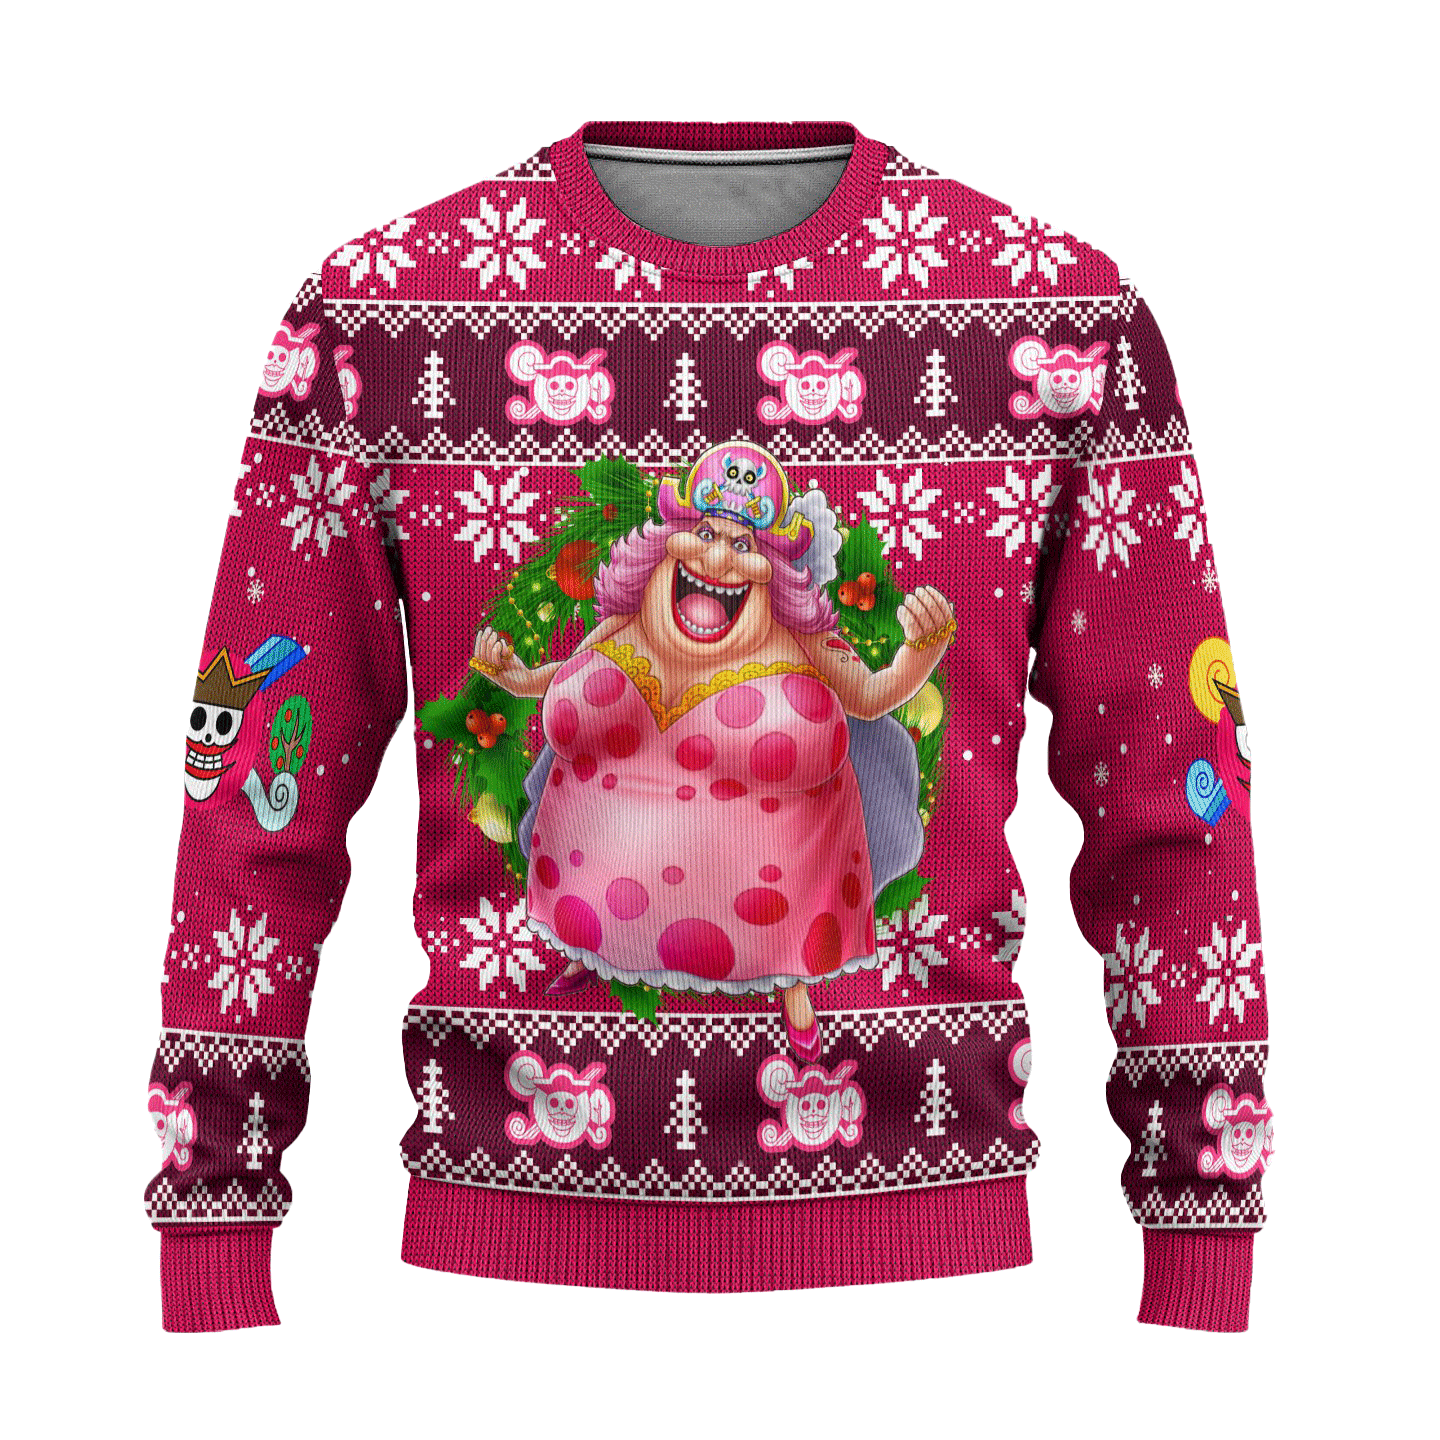 Charlotte Linlin One Piece Anime Ugly Christmas Sweater Xmas Gift